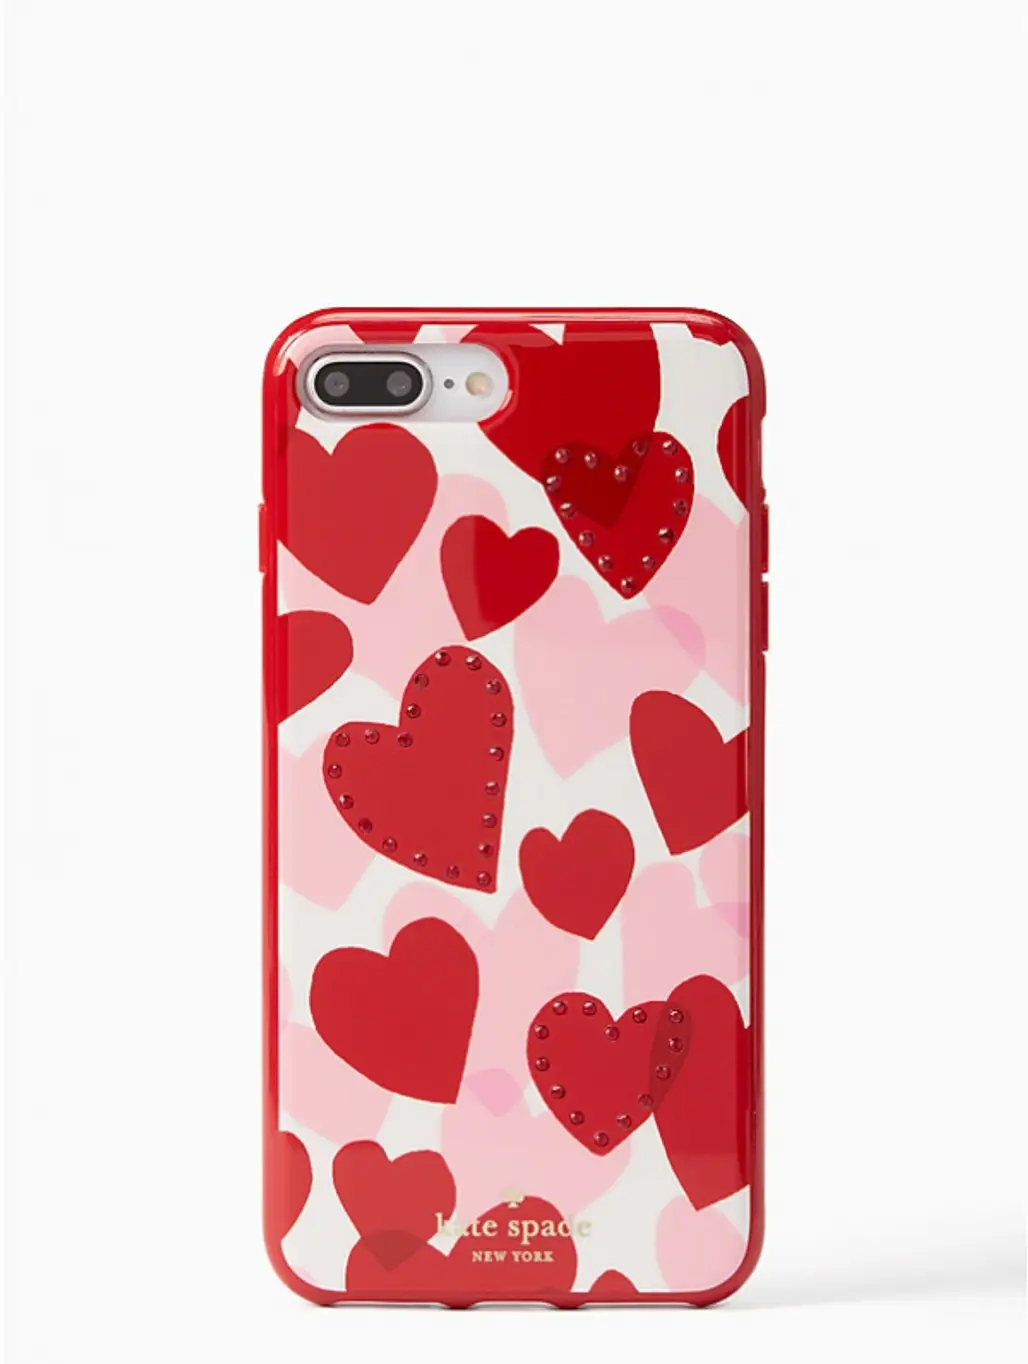 red, mobile phone accessories, mobile phone case, heart, telephony,